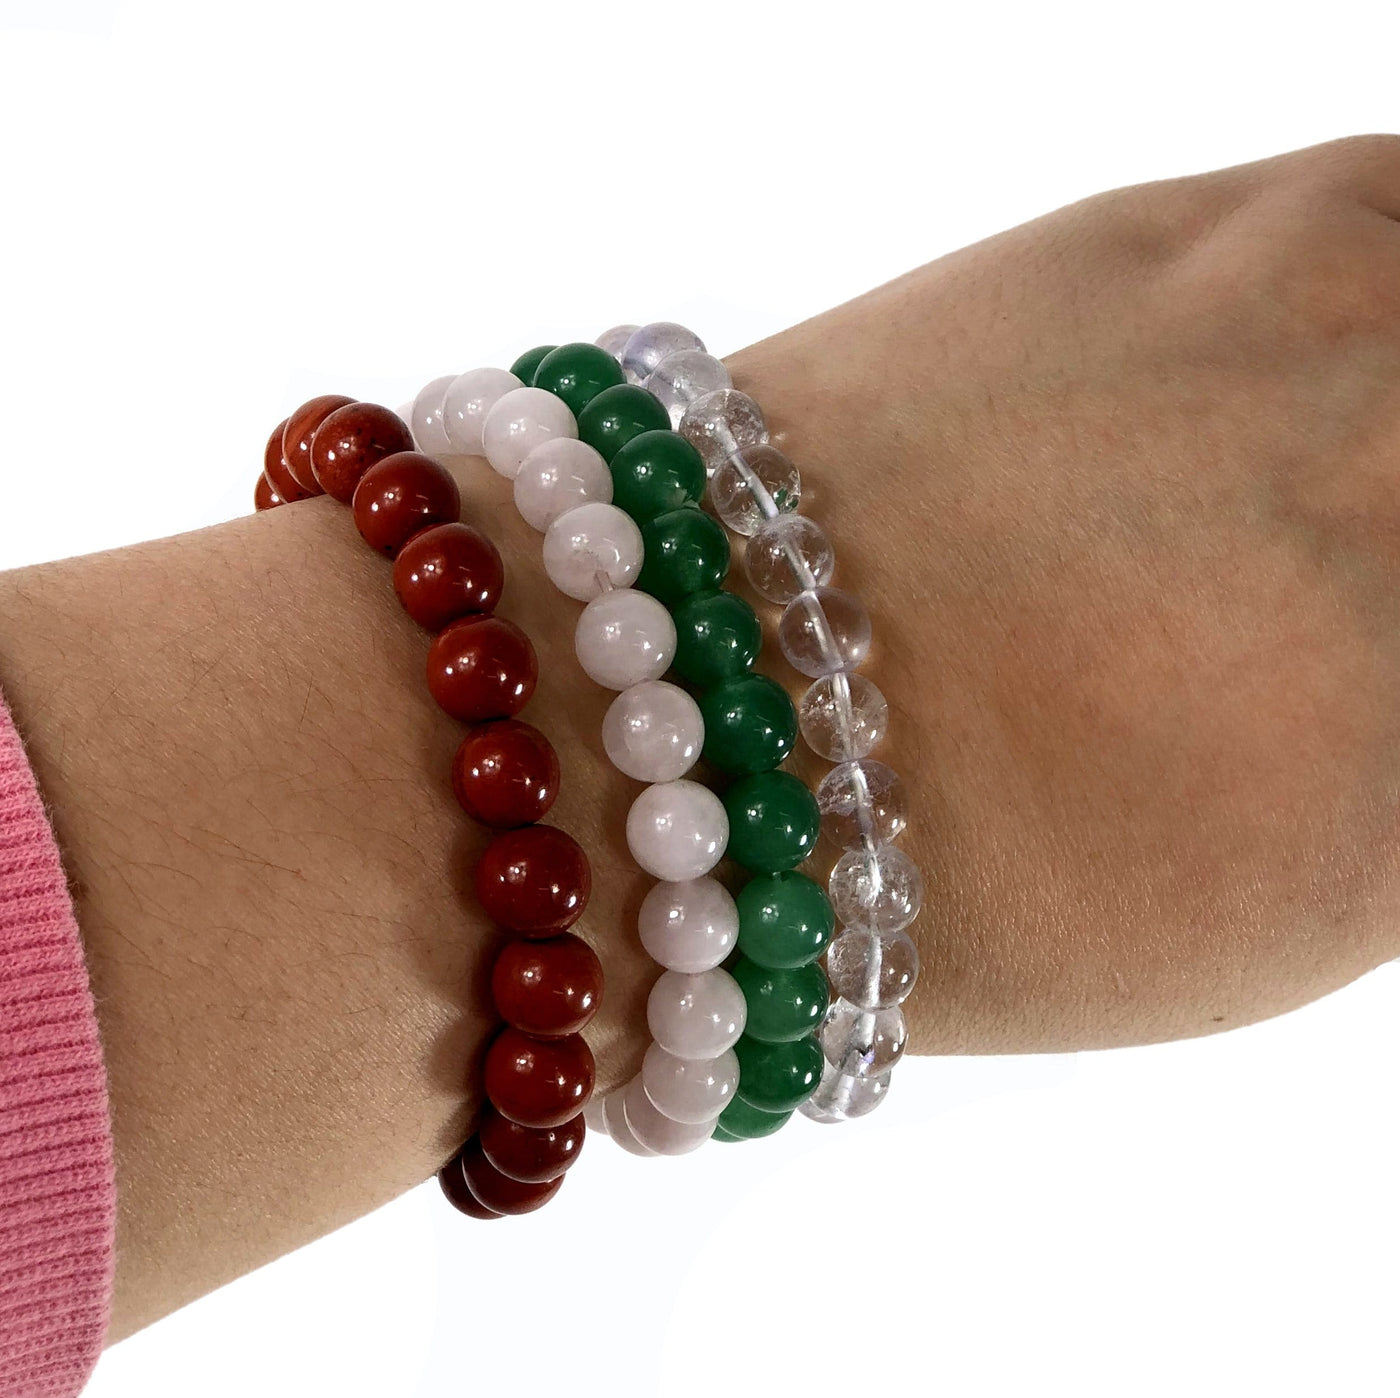 varied healing stone bracelets being worn with white background